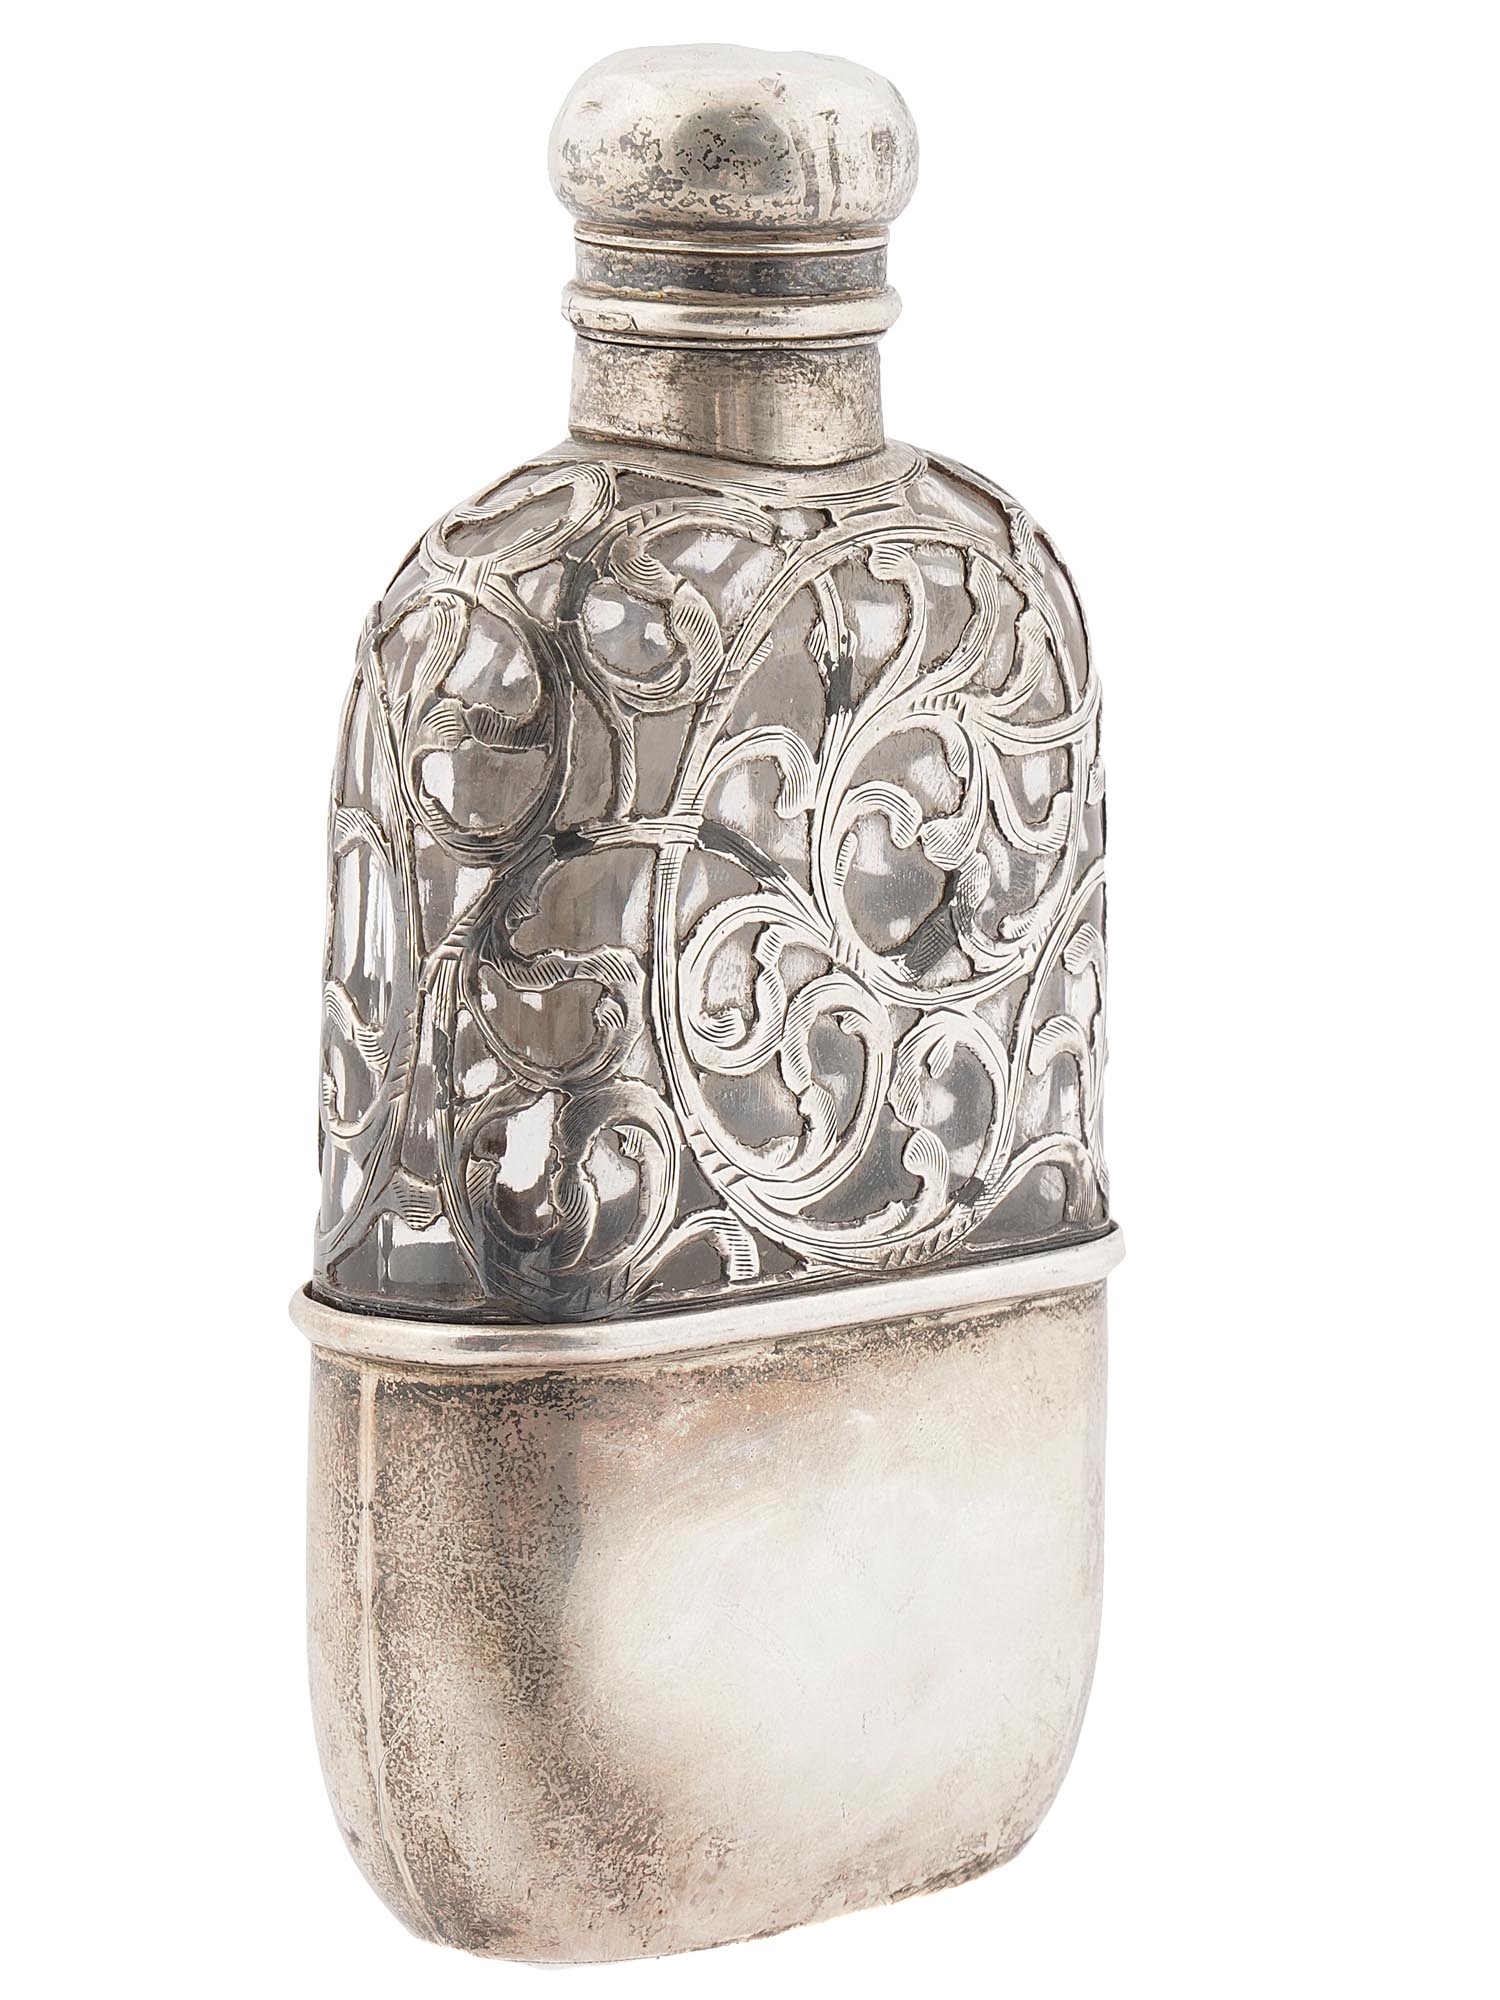 ANTIQUE AMERICAN ART NOUVEAU SILVER OVERLAY FLASK PIC-0